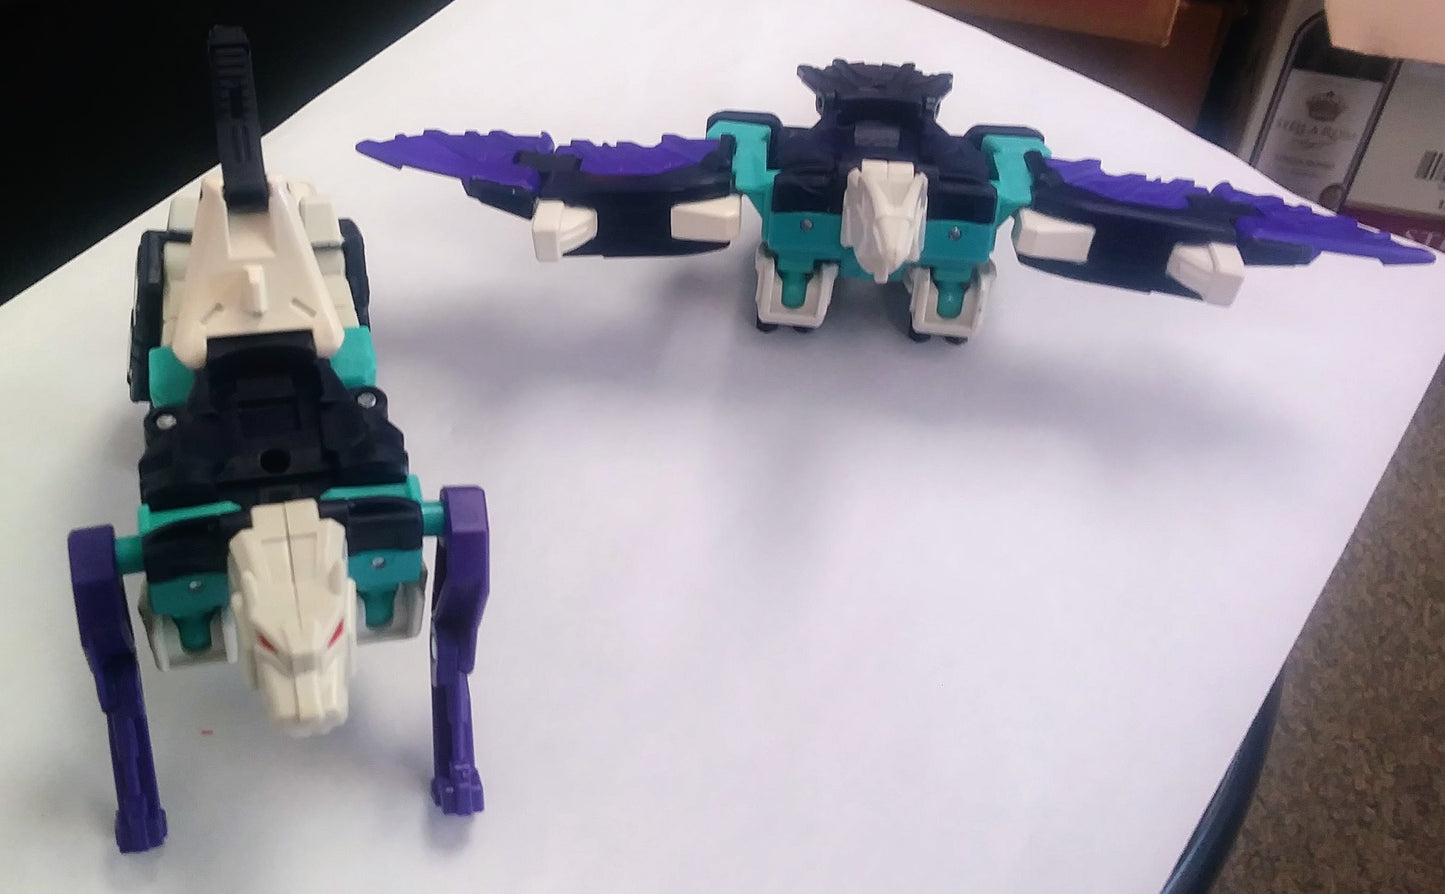 Transformers action figure set - Decepticons Wingspan and Pounce (Earthrise)